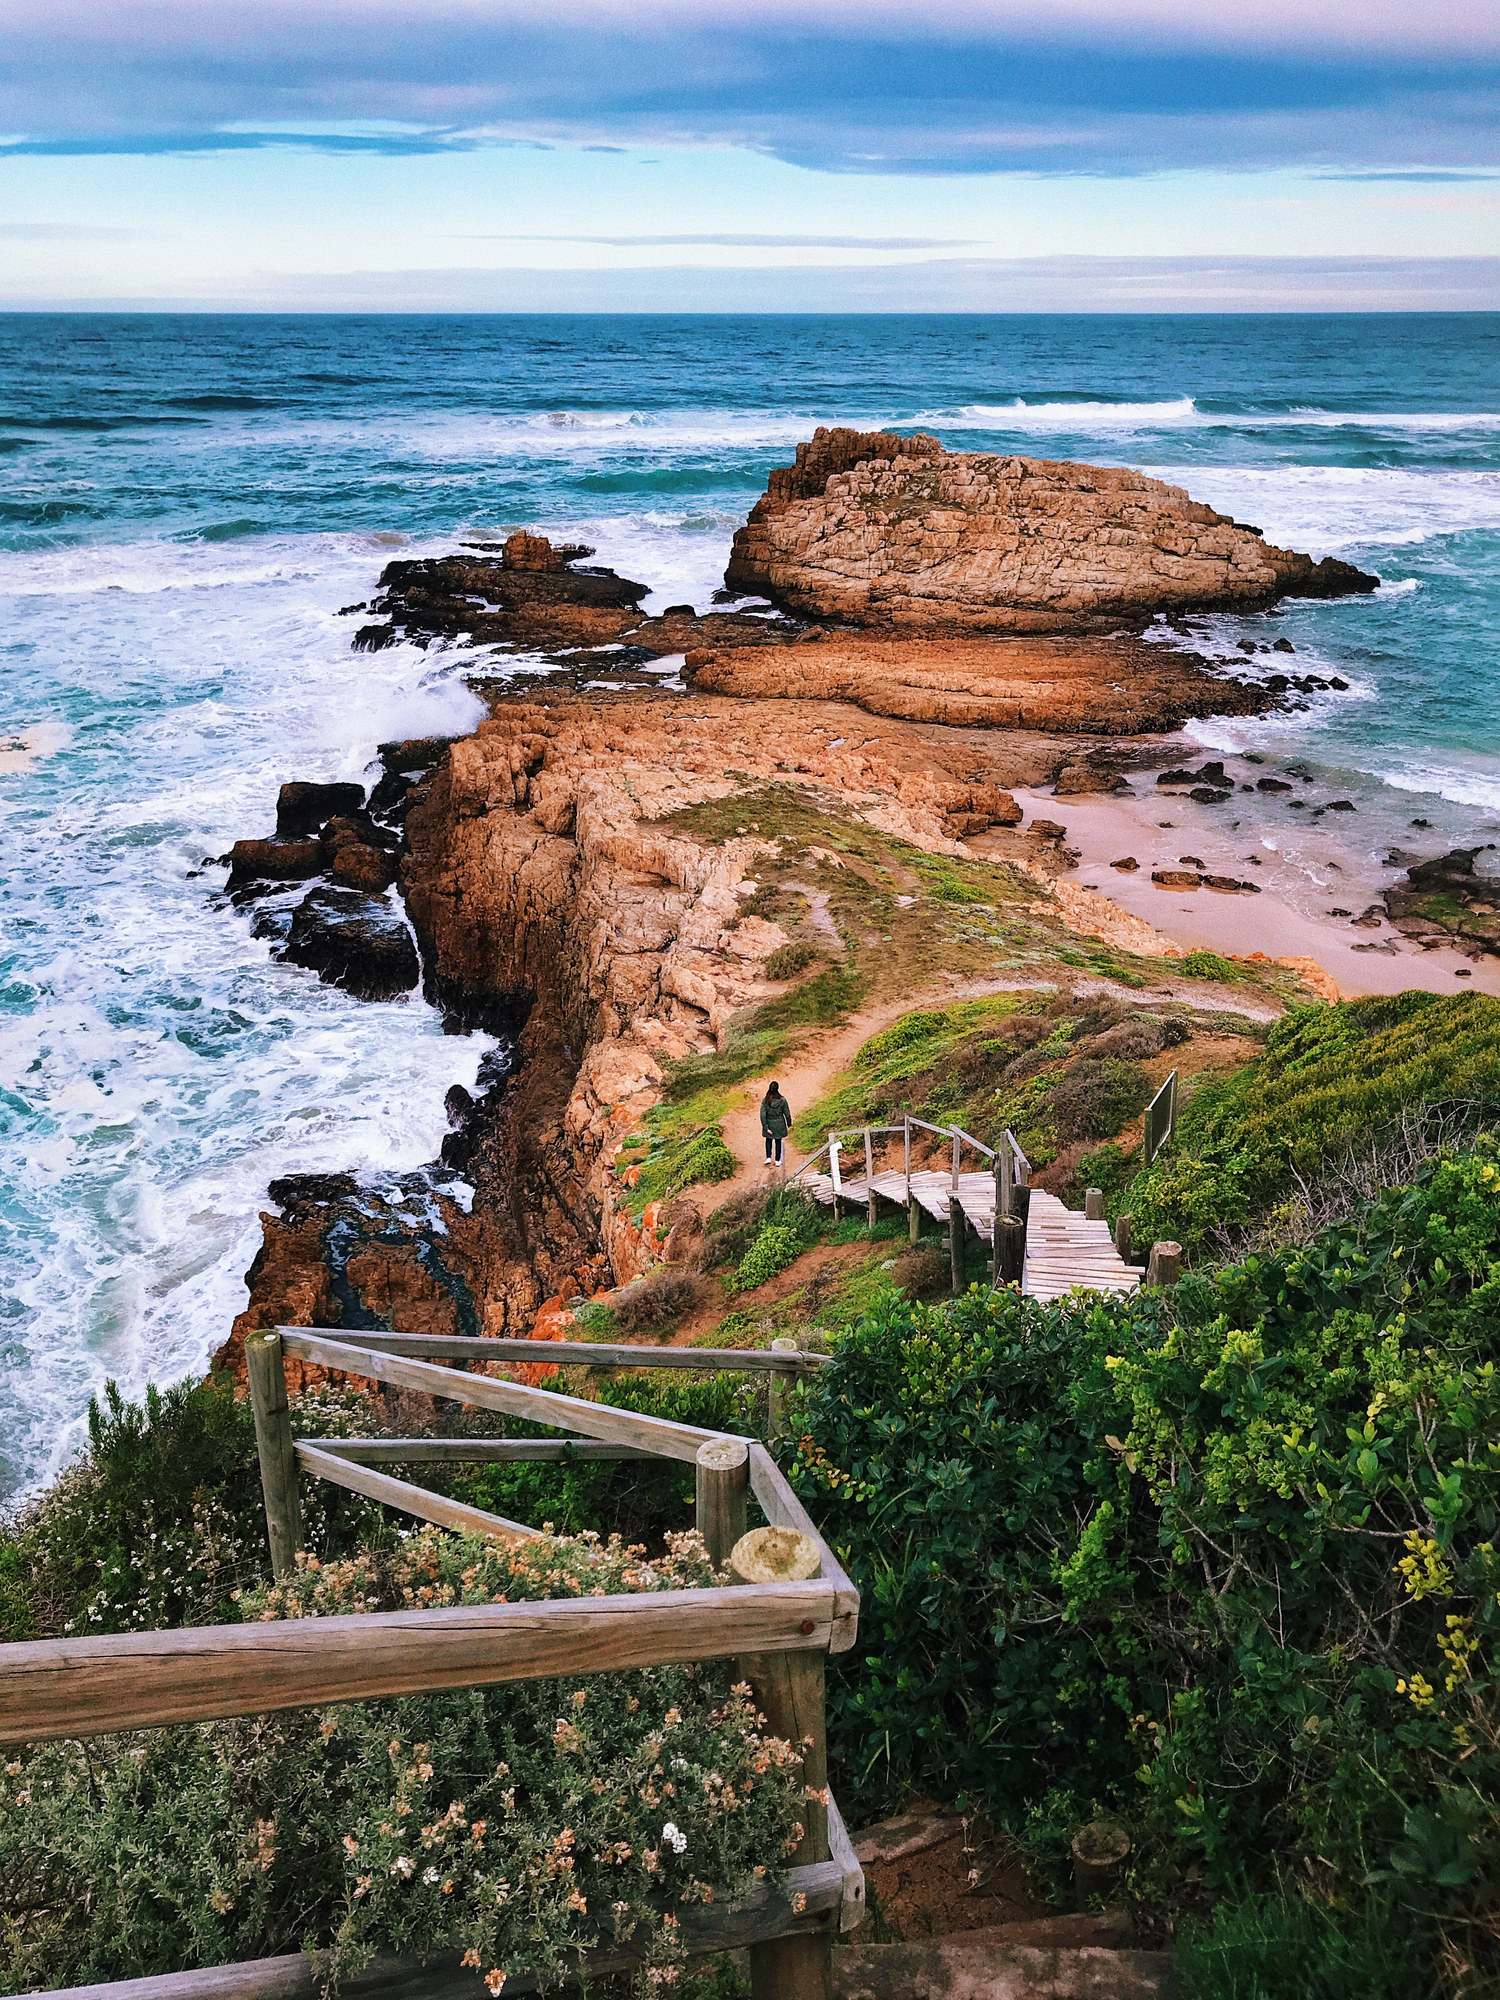 A wooden staircase leading down to a rocky beach in Knysna